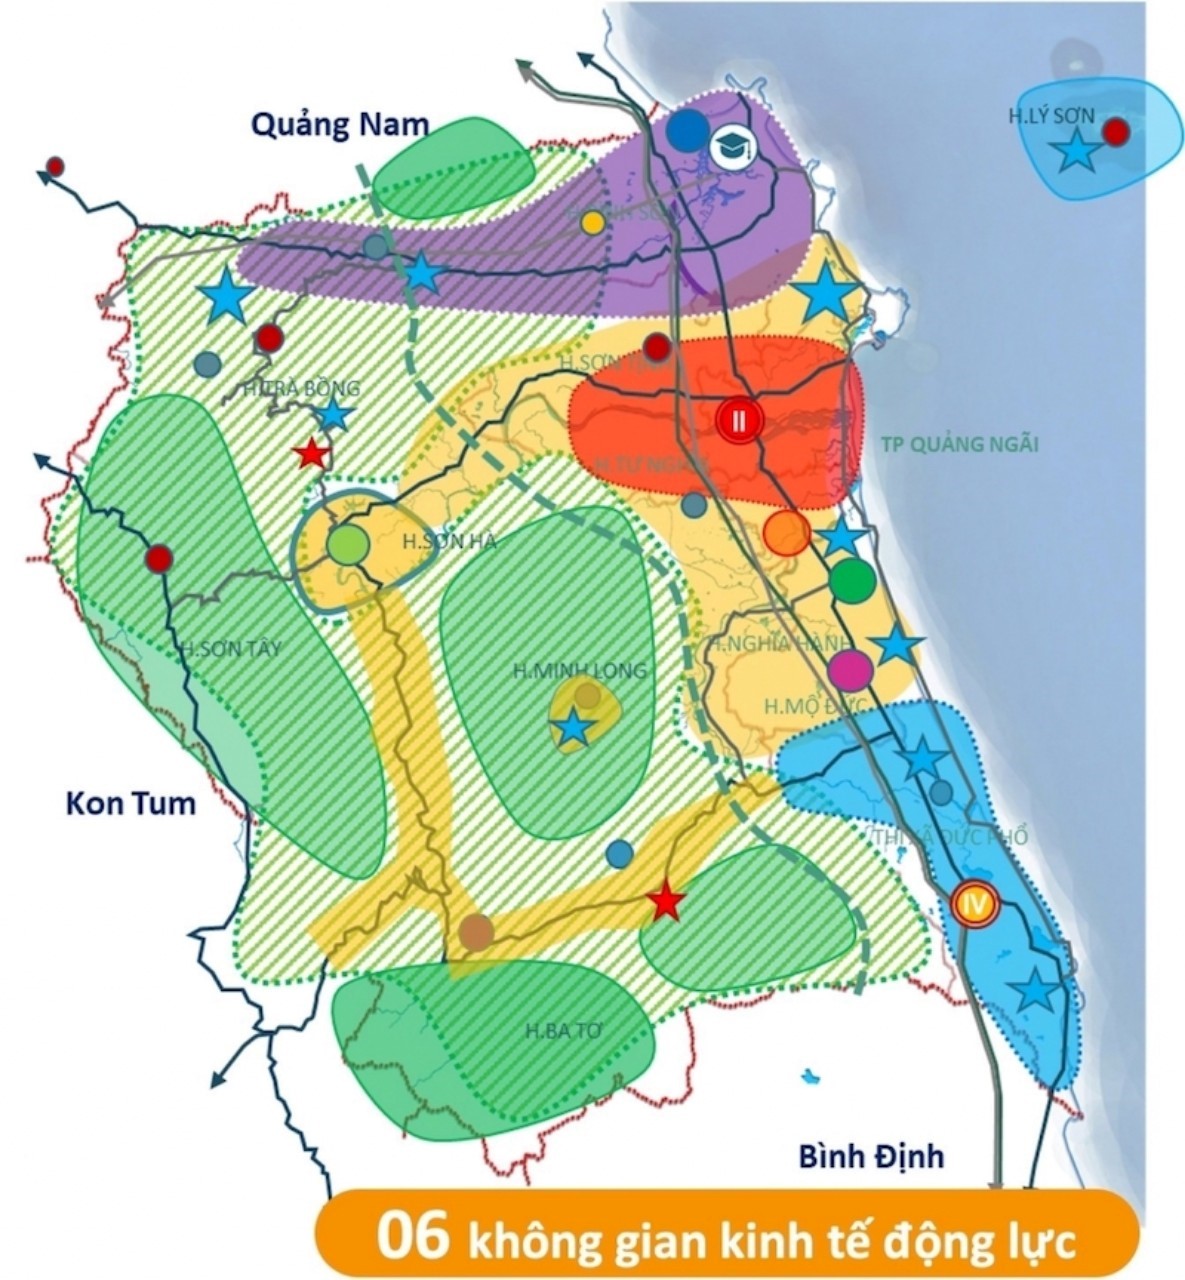 The majority of the Appraisal Council members said that the national transport system to the economic development of Quang Ngai, especially for logistics services, at the same time clarified the development linkage between the airport and the airport. Chu Lai with Dung Quat port, especially an important import-export port via air and seaport, is an advantage of Quang Ngai.